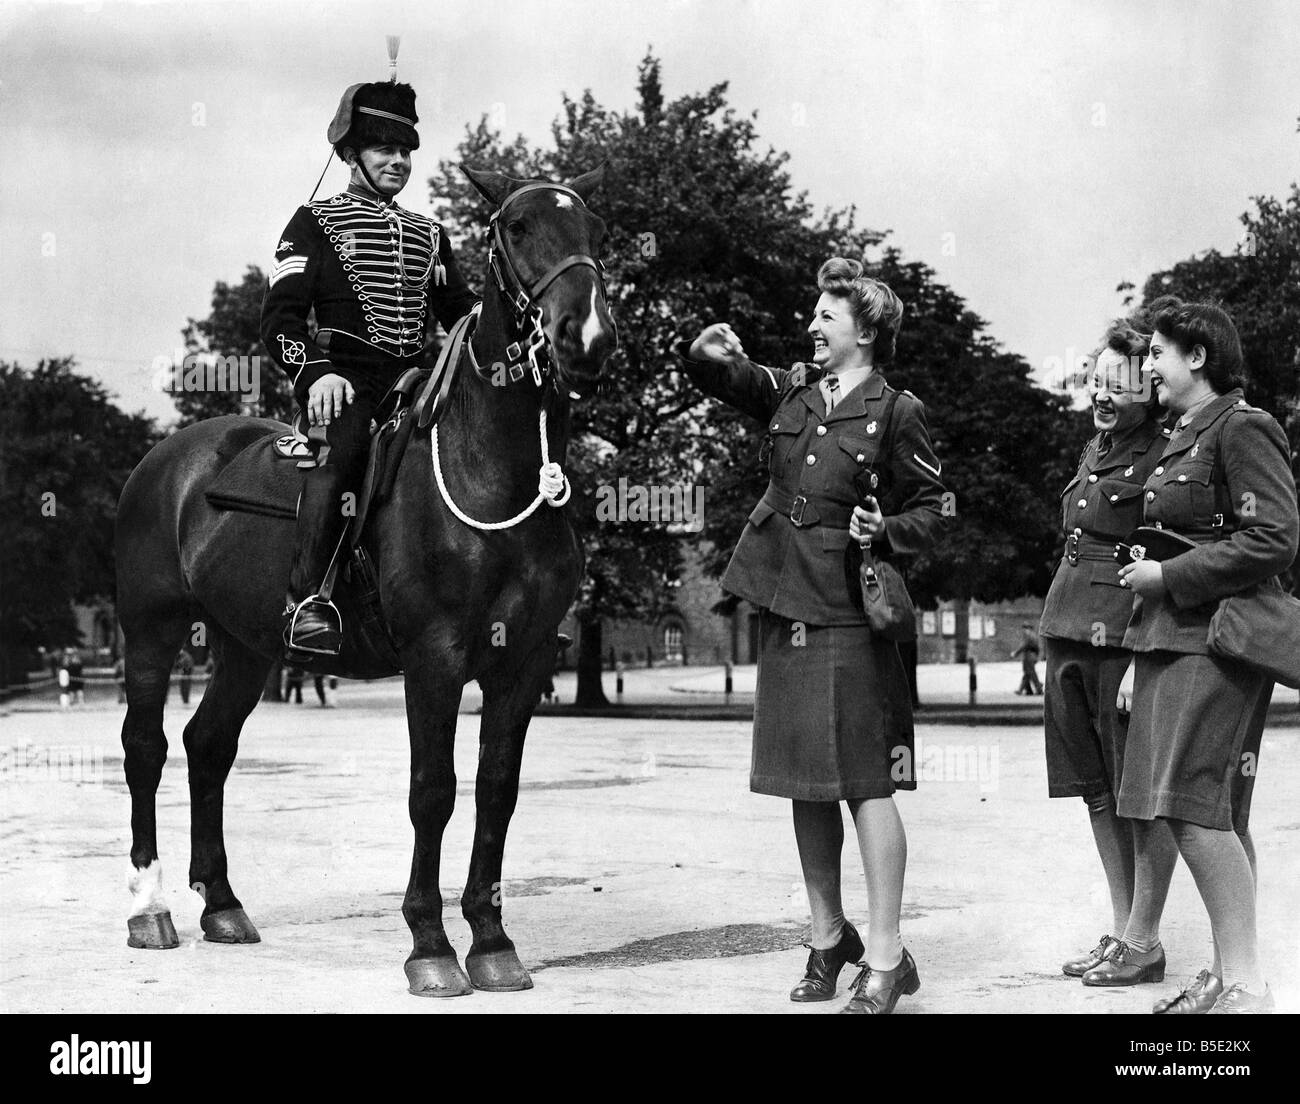 The old and the new at Woolchurch Royal Artillery Depot ;Sheila Ward of Purley, Surrey admires the old time horse of the artilery man. Mounted is Sgt. Arthur Parmented of Pitsea, Essex. ;May 1945 Stock Photo